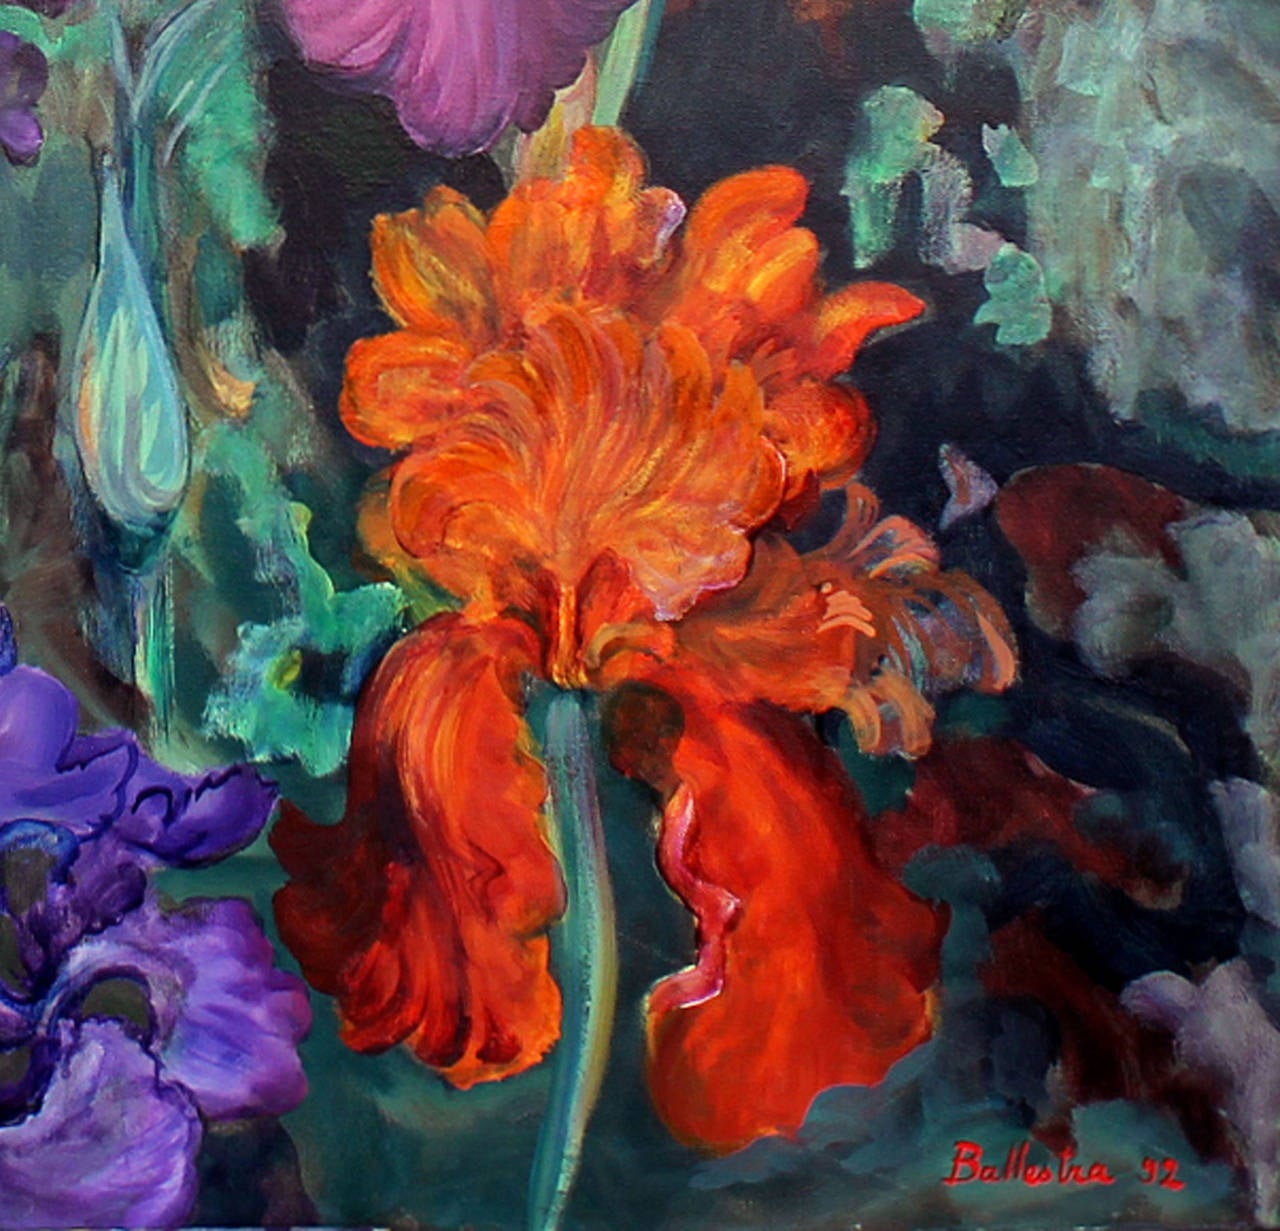 Iris conversation is a painting made by Evelyne Ballestra, a French contemporary artist. This piece is a part of a flower series, defined by their distinct bright colors, satiny, silky, vibrating materials and form. The flower series is reminiscent